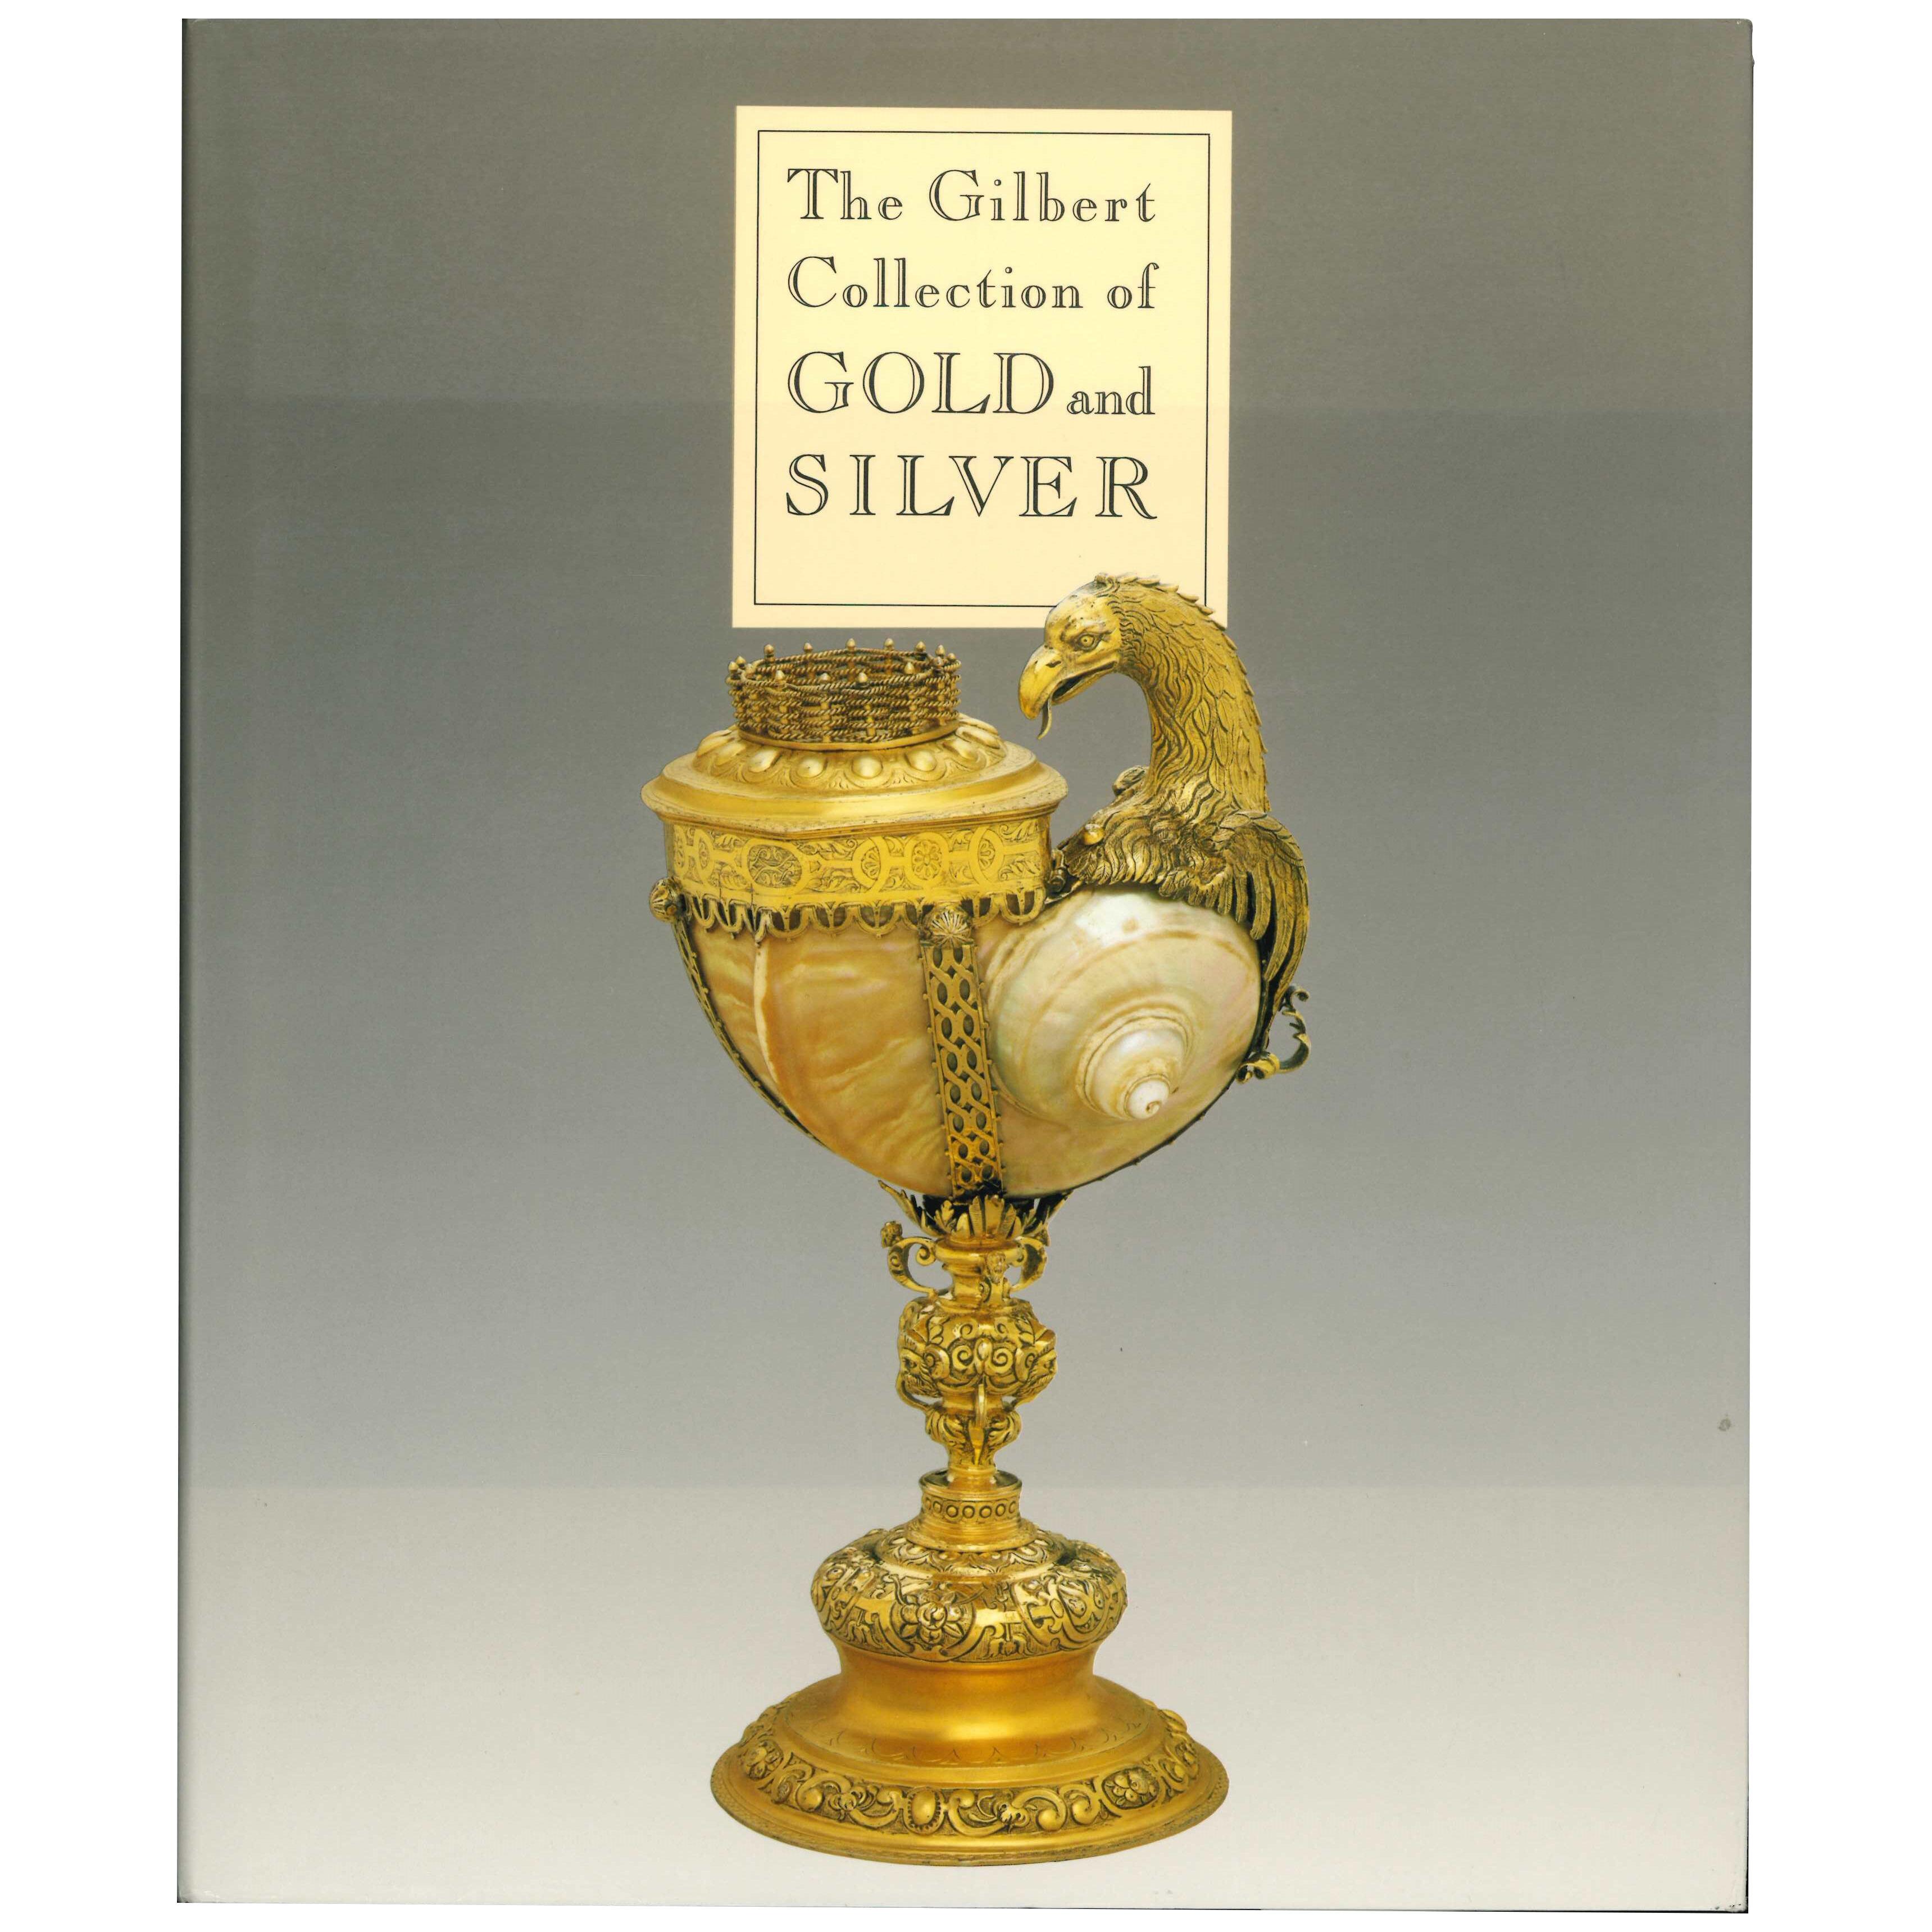 THE GILBERT COLLECTION OF GOLD AND SILVER. Book